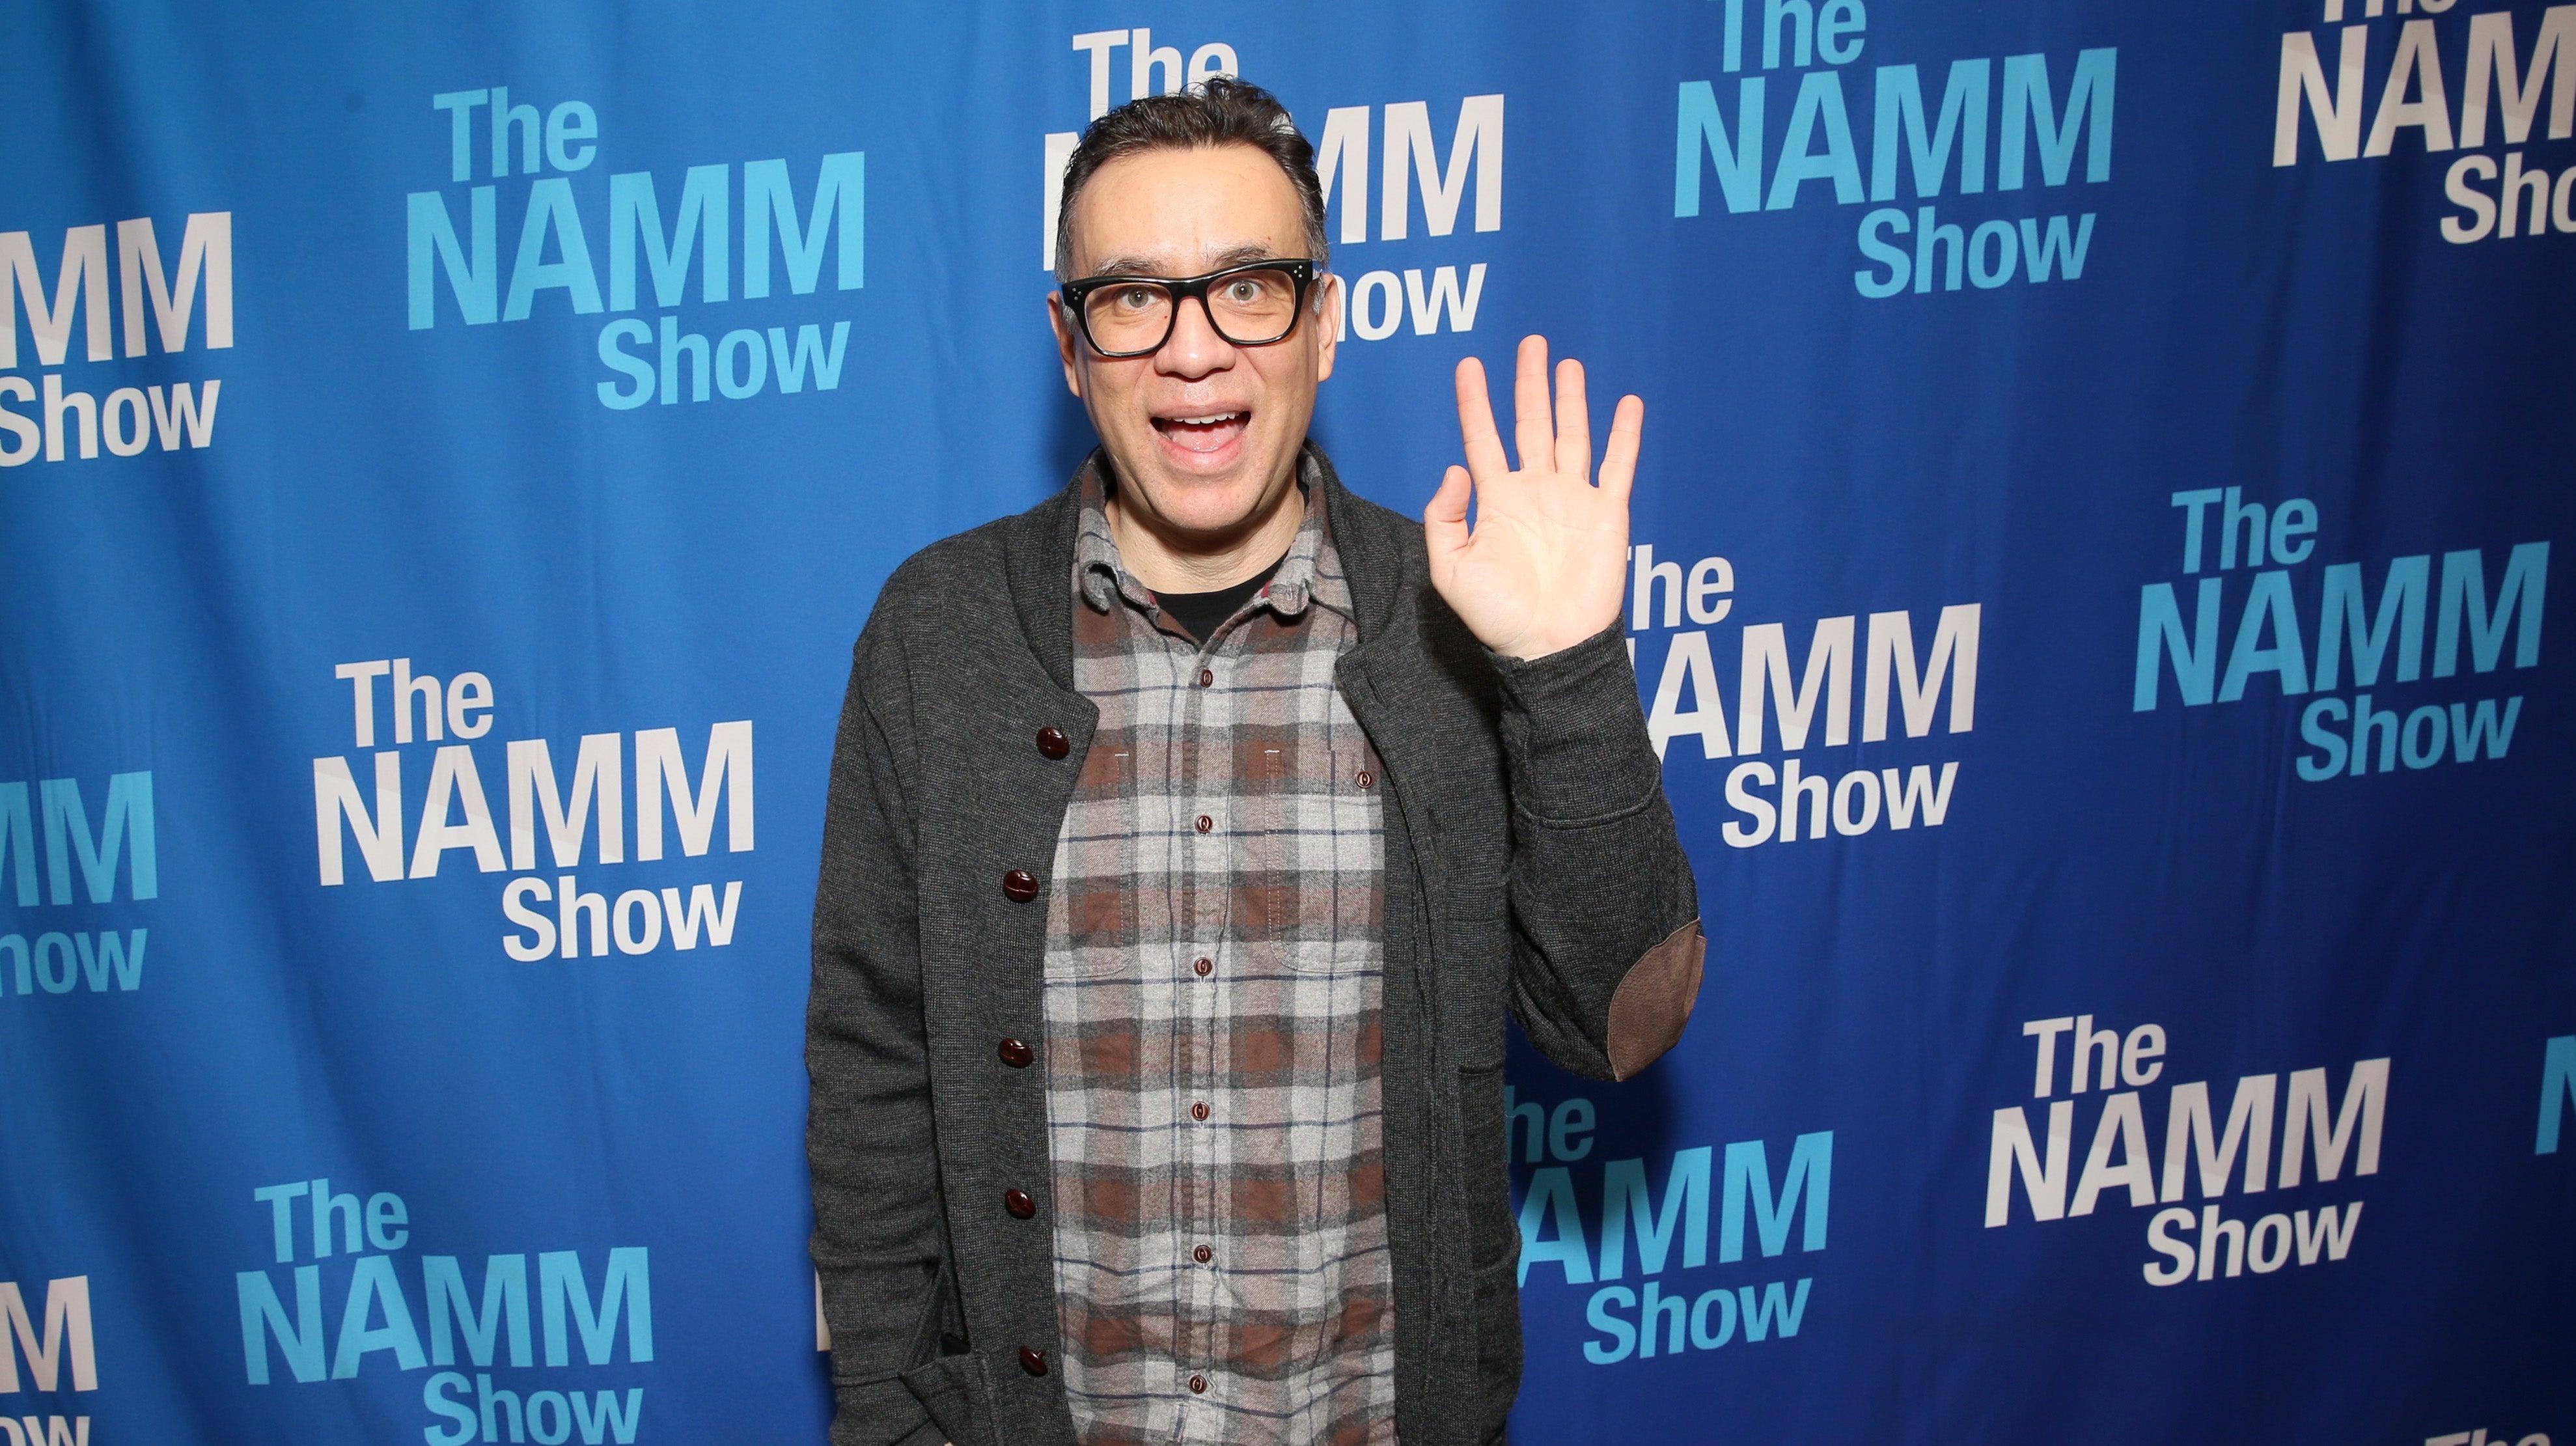 Shiver me timbers, Fred Armisen joins Taika Waititi’s HBO Max pirate comedy Our Flag Means Death